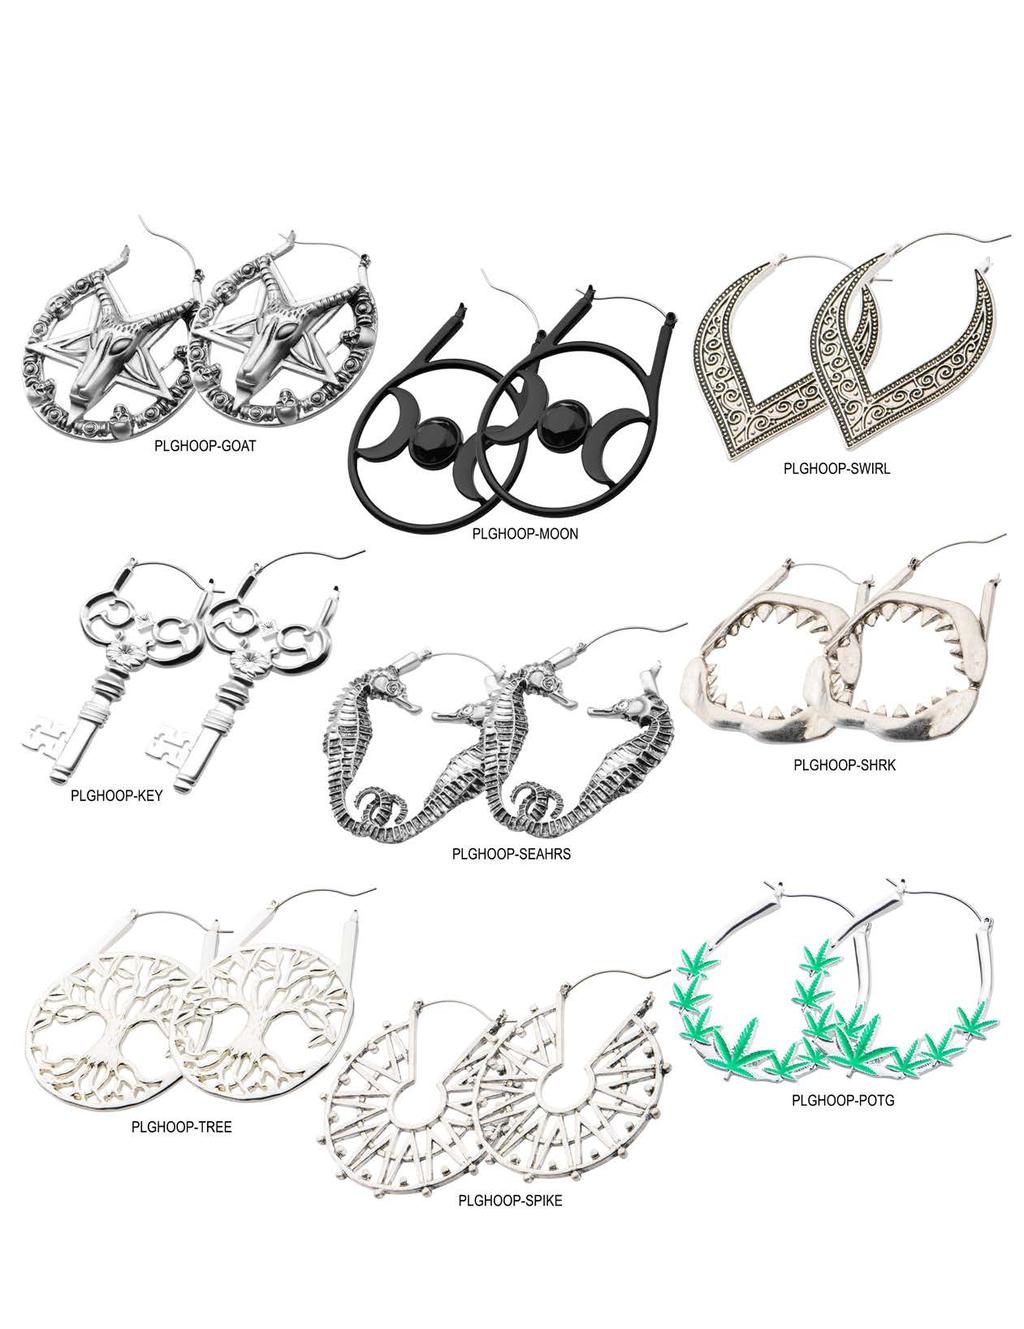 PLUG HOOPS Plug hoops were designed to fit comfortably in any tunnel style of body jewelry worn in the